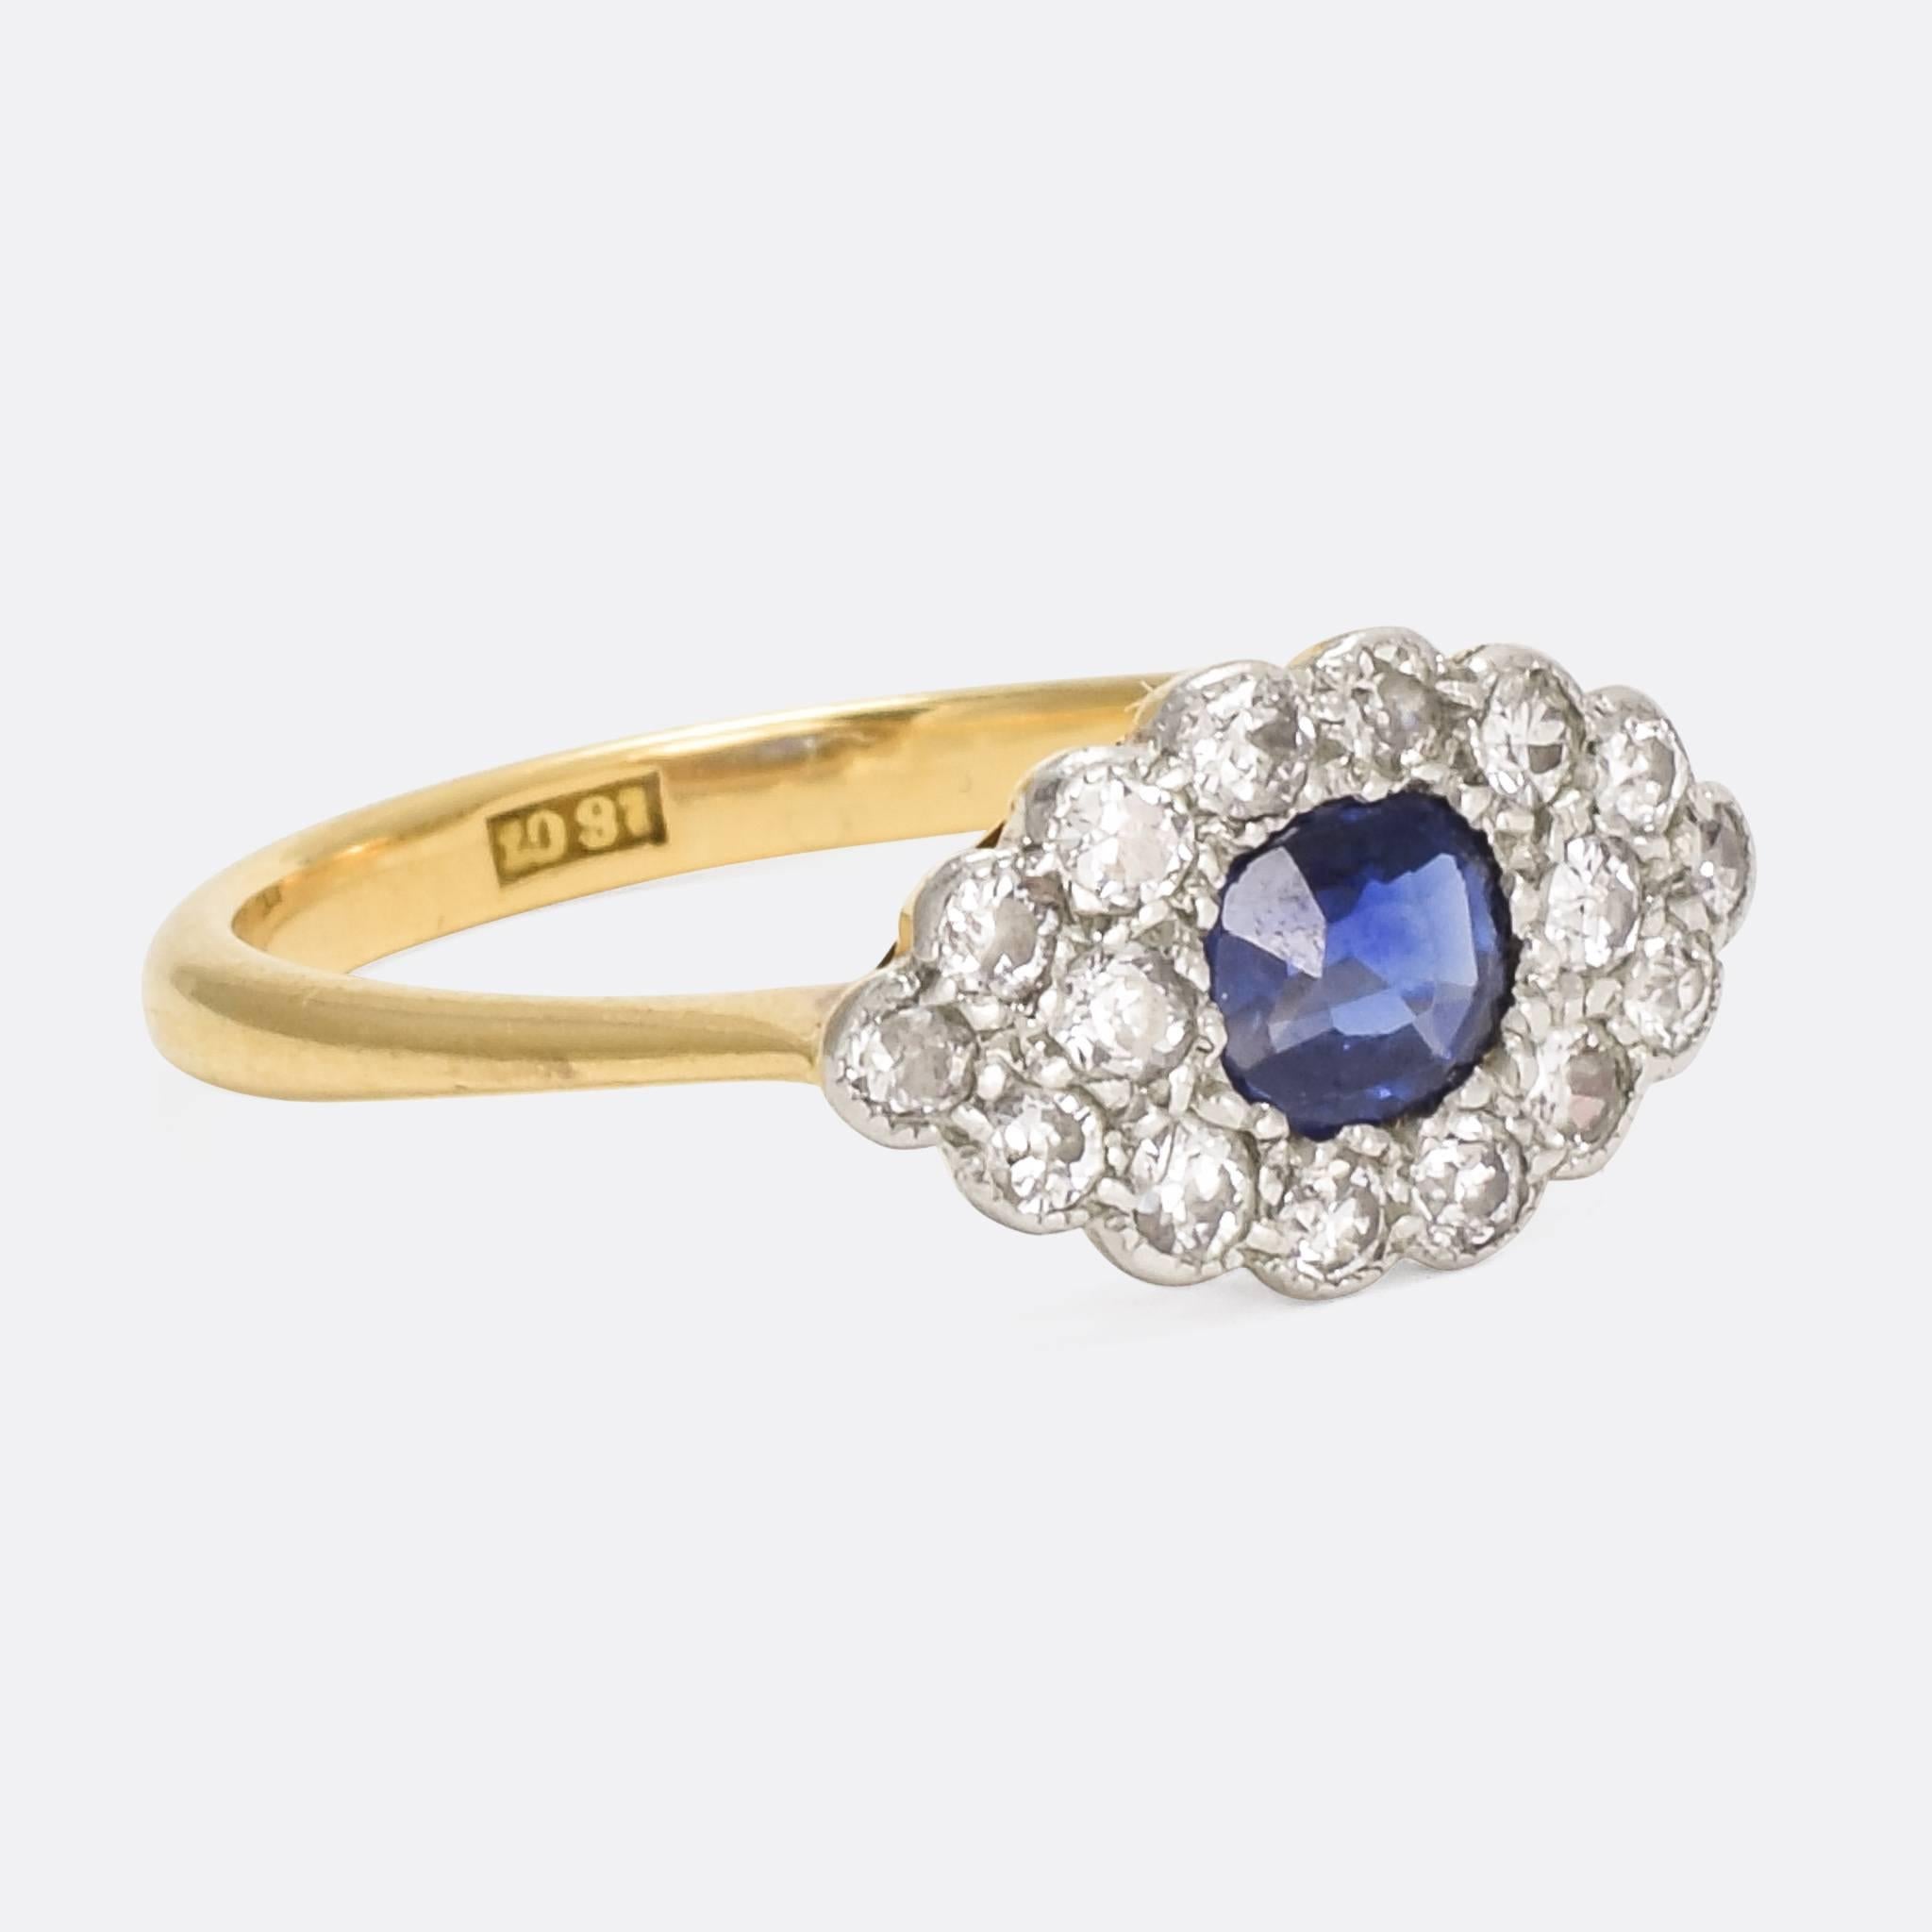 A wonderful Blue Sapphire & Old Cut Diamond Eye Ring dating from the Edwardian era, circa 1910. It's modelled in 18 karat yellow gold with platinum settings, very typical of the period, and features a fine pierced gallery. The piece has a clear 18ct